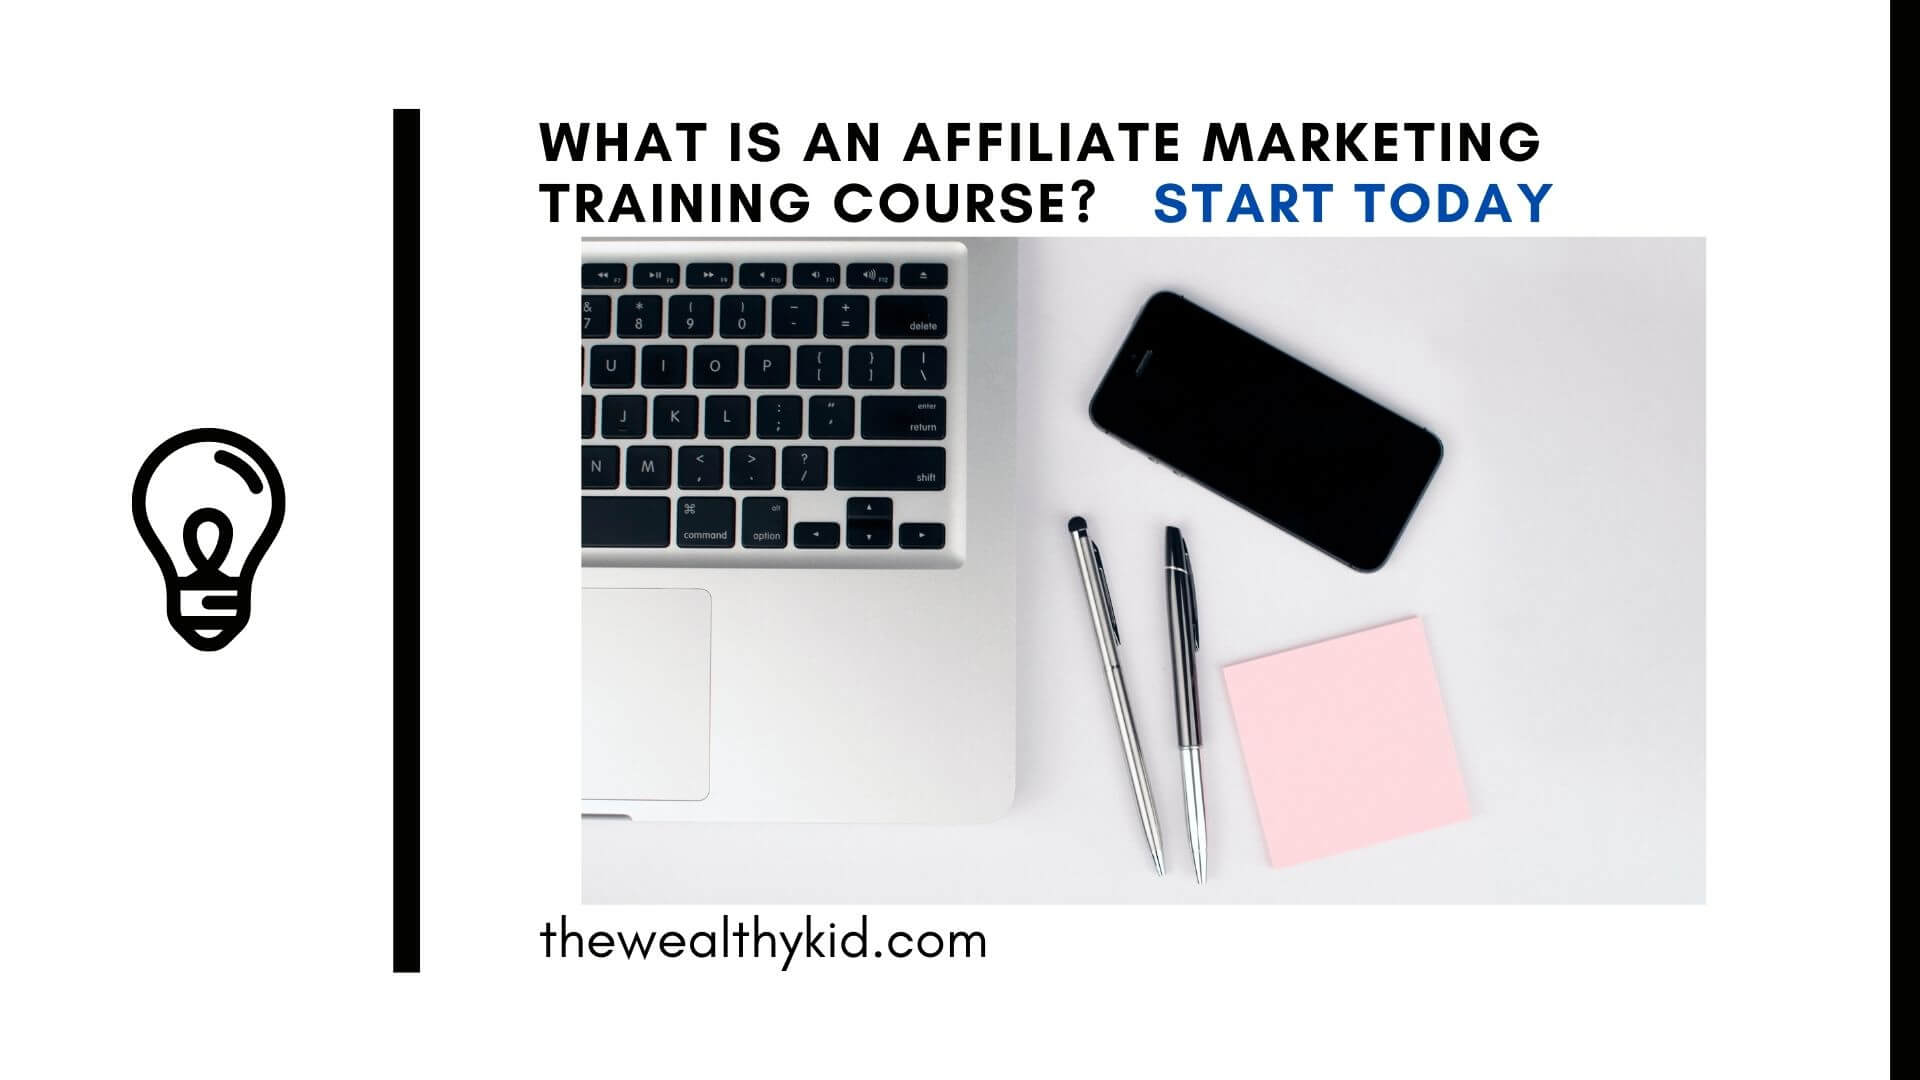 What Is An Affiliate Marketing Training Course?